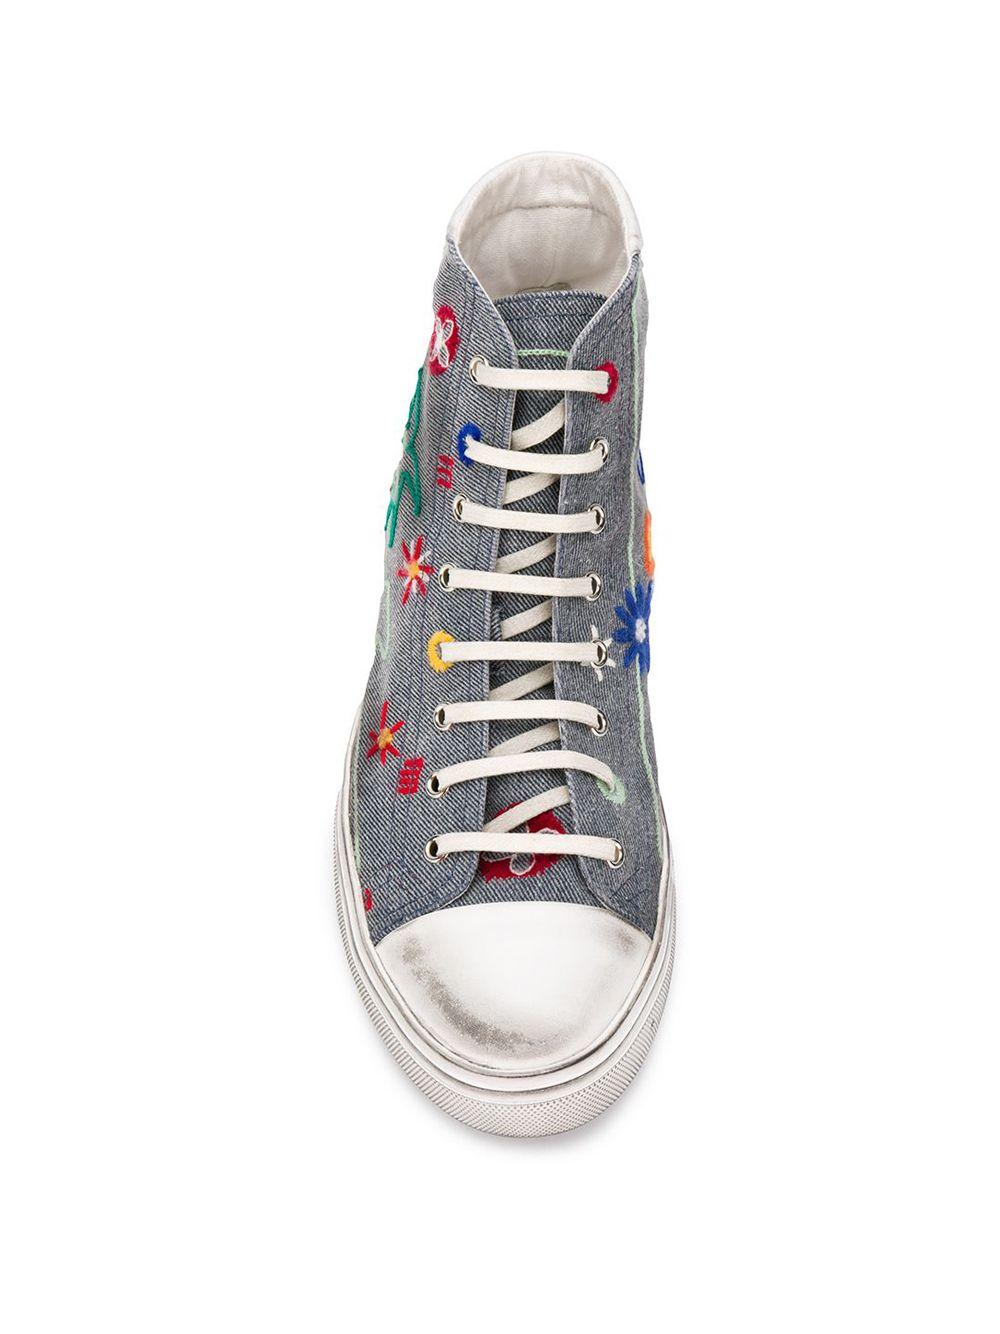 Saint Laurent Tropical-Embroidered High Top Bedford Distressed Sneakers Size 38 In New Condition In Paradise Island, BS